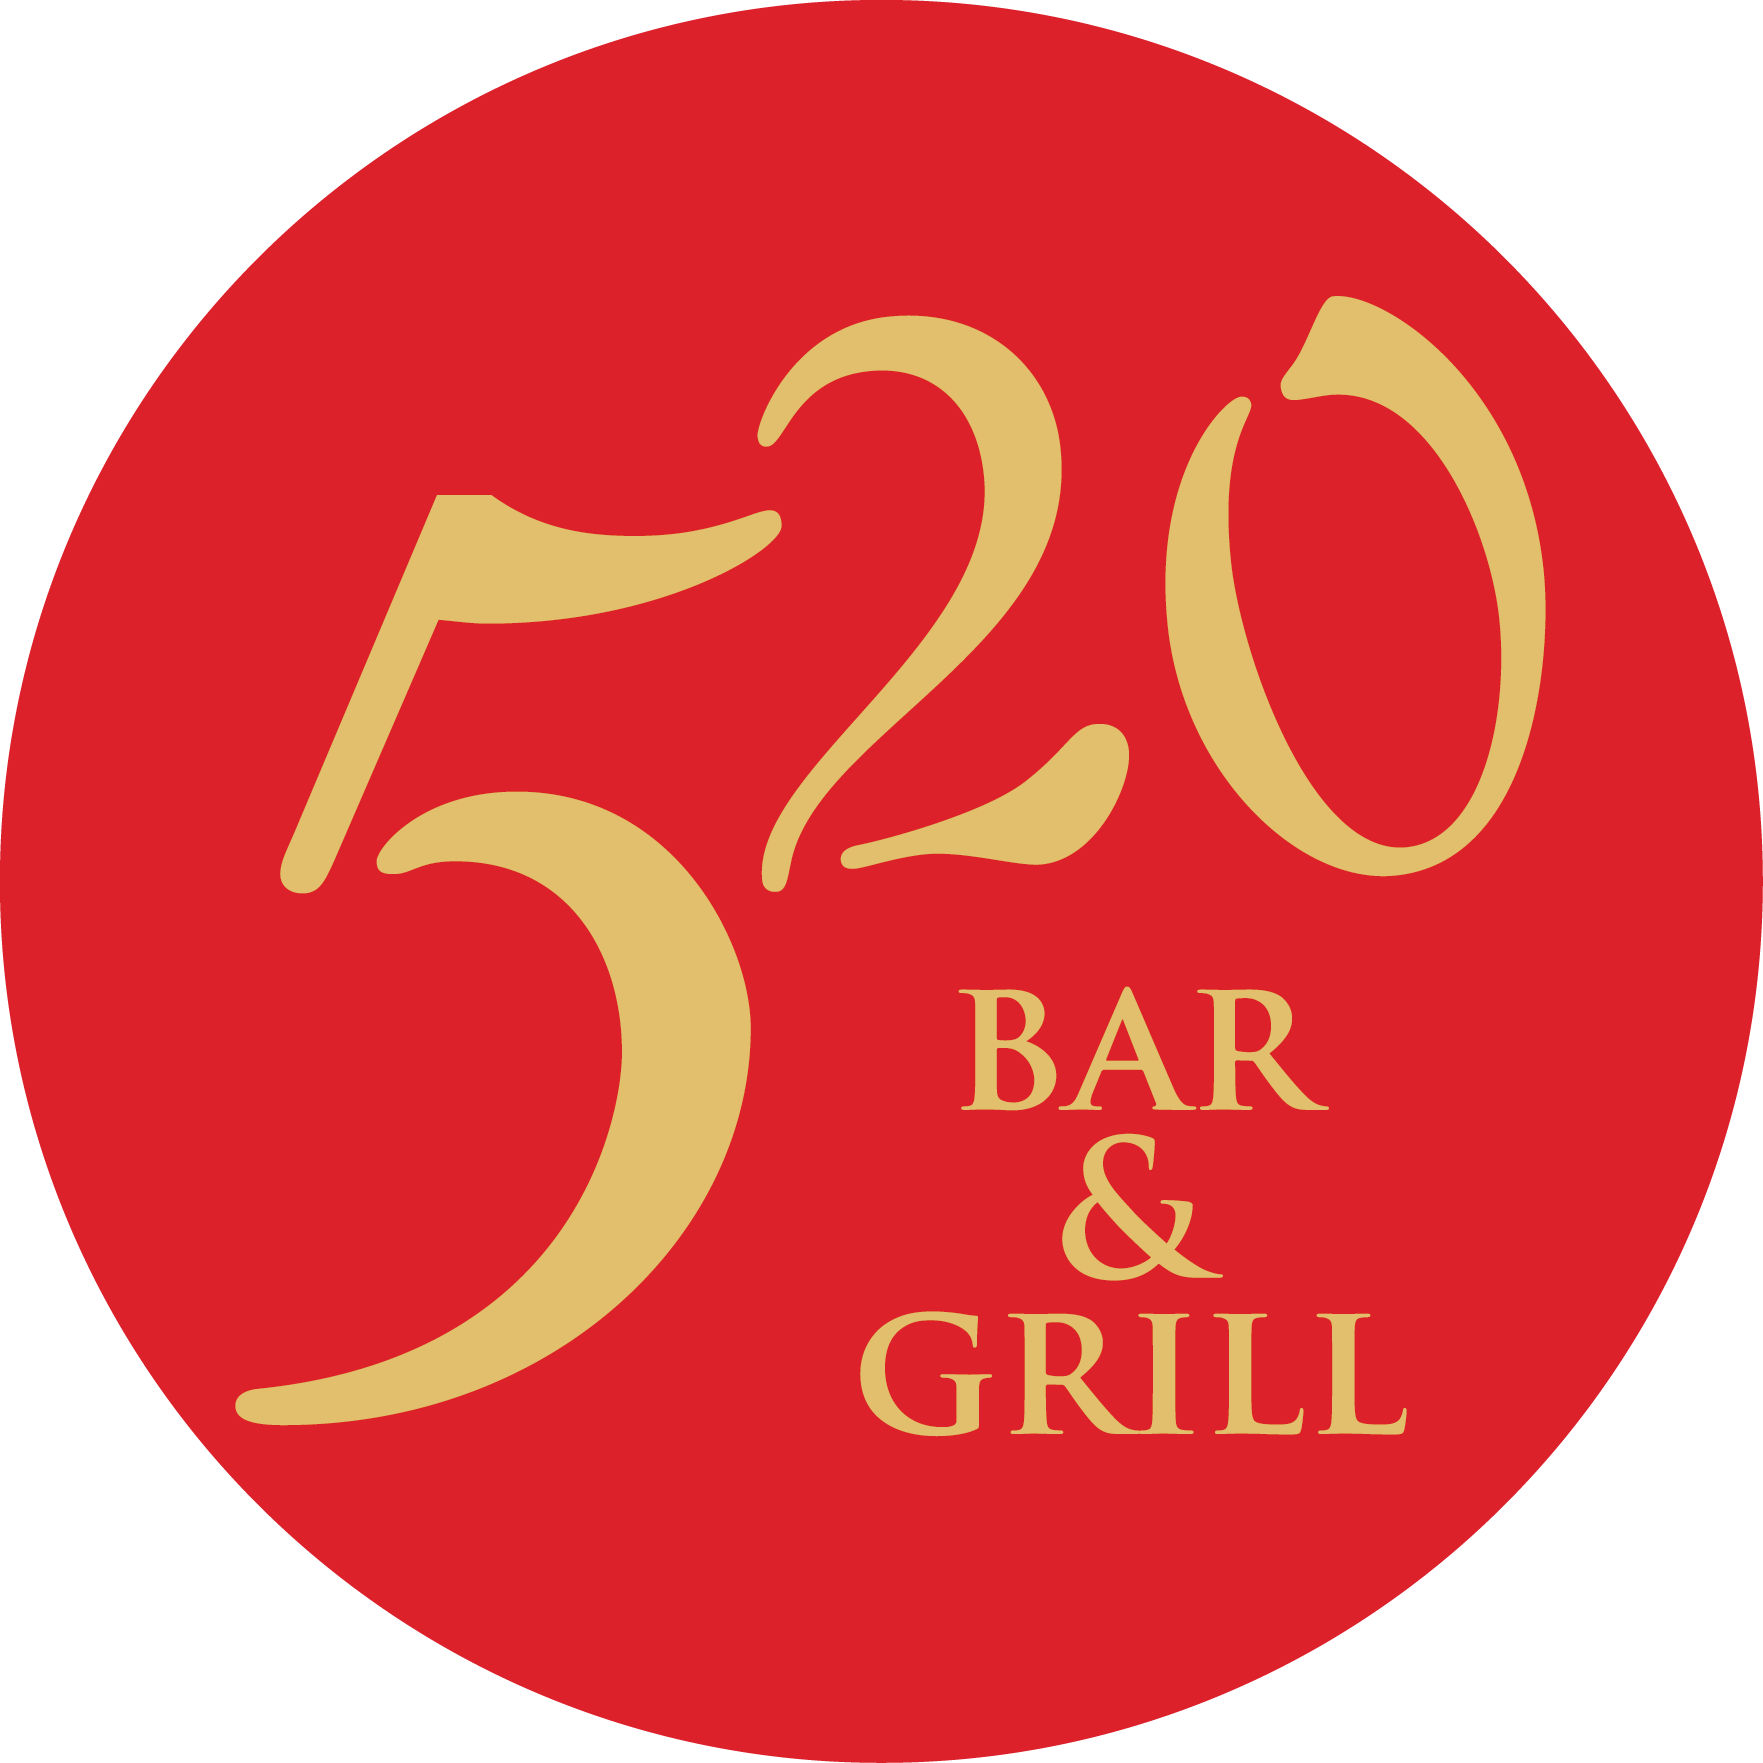 Business logo of 520 Bar & Grill